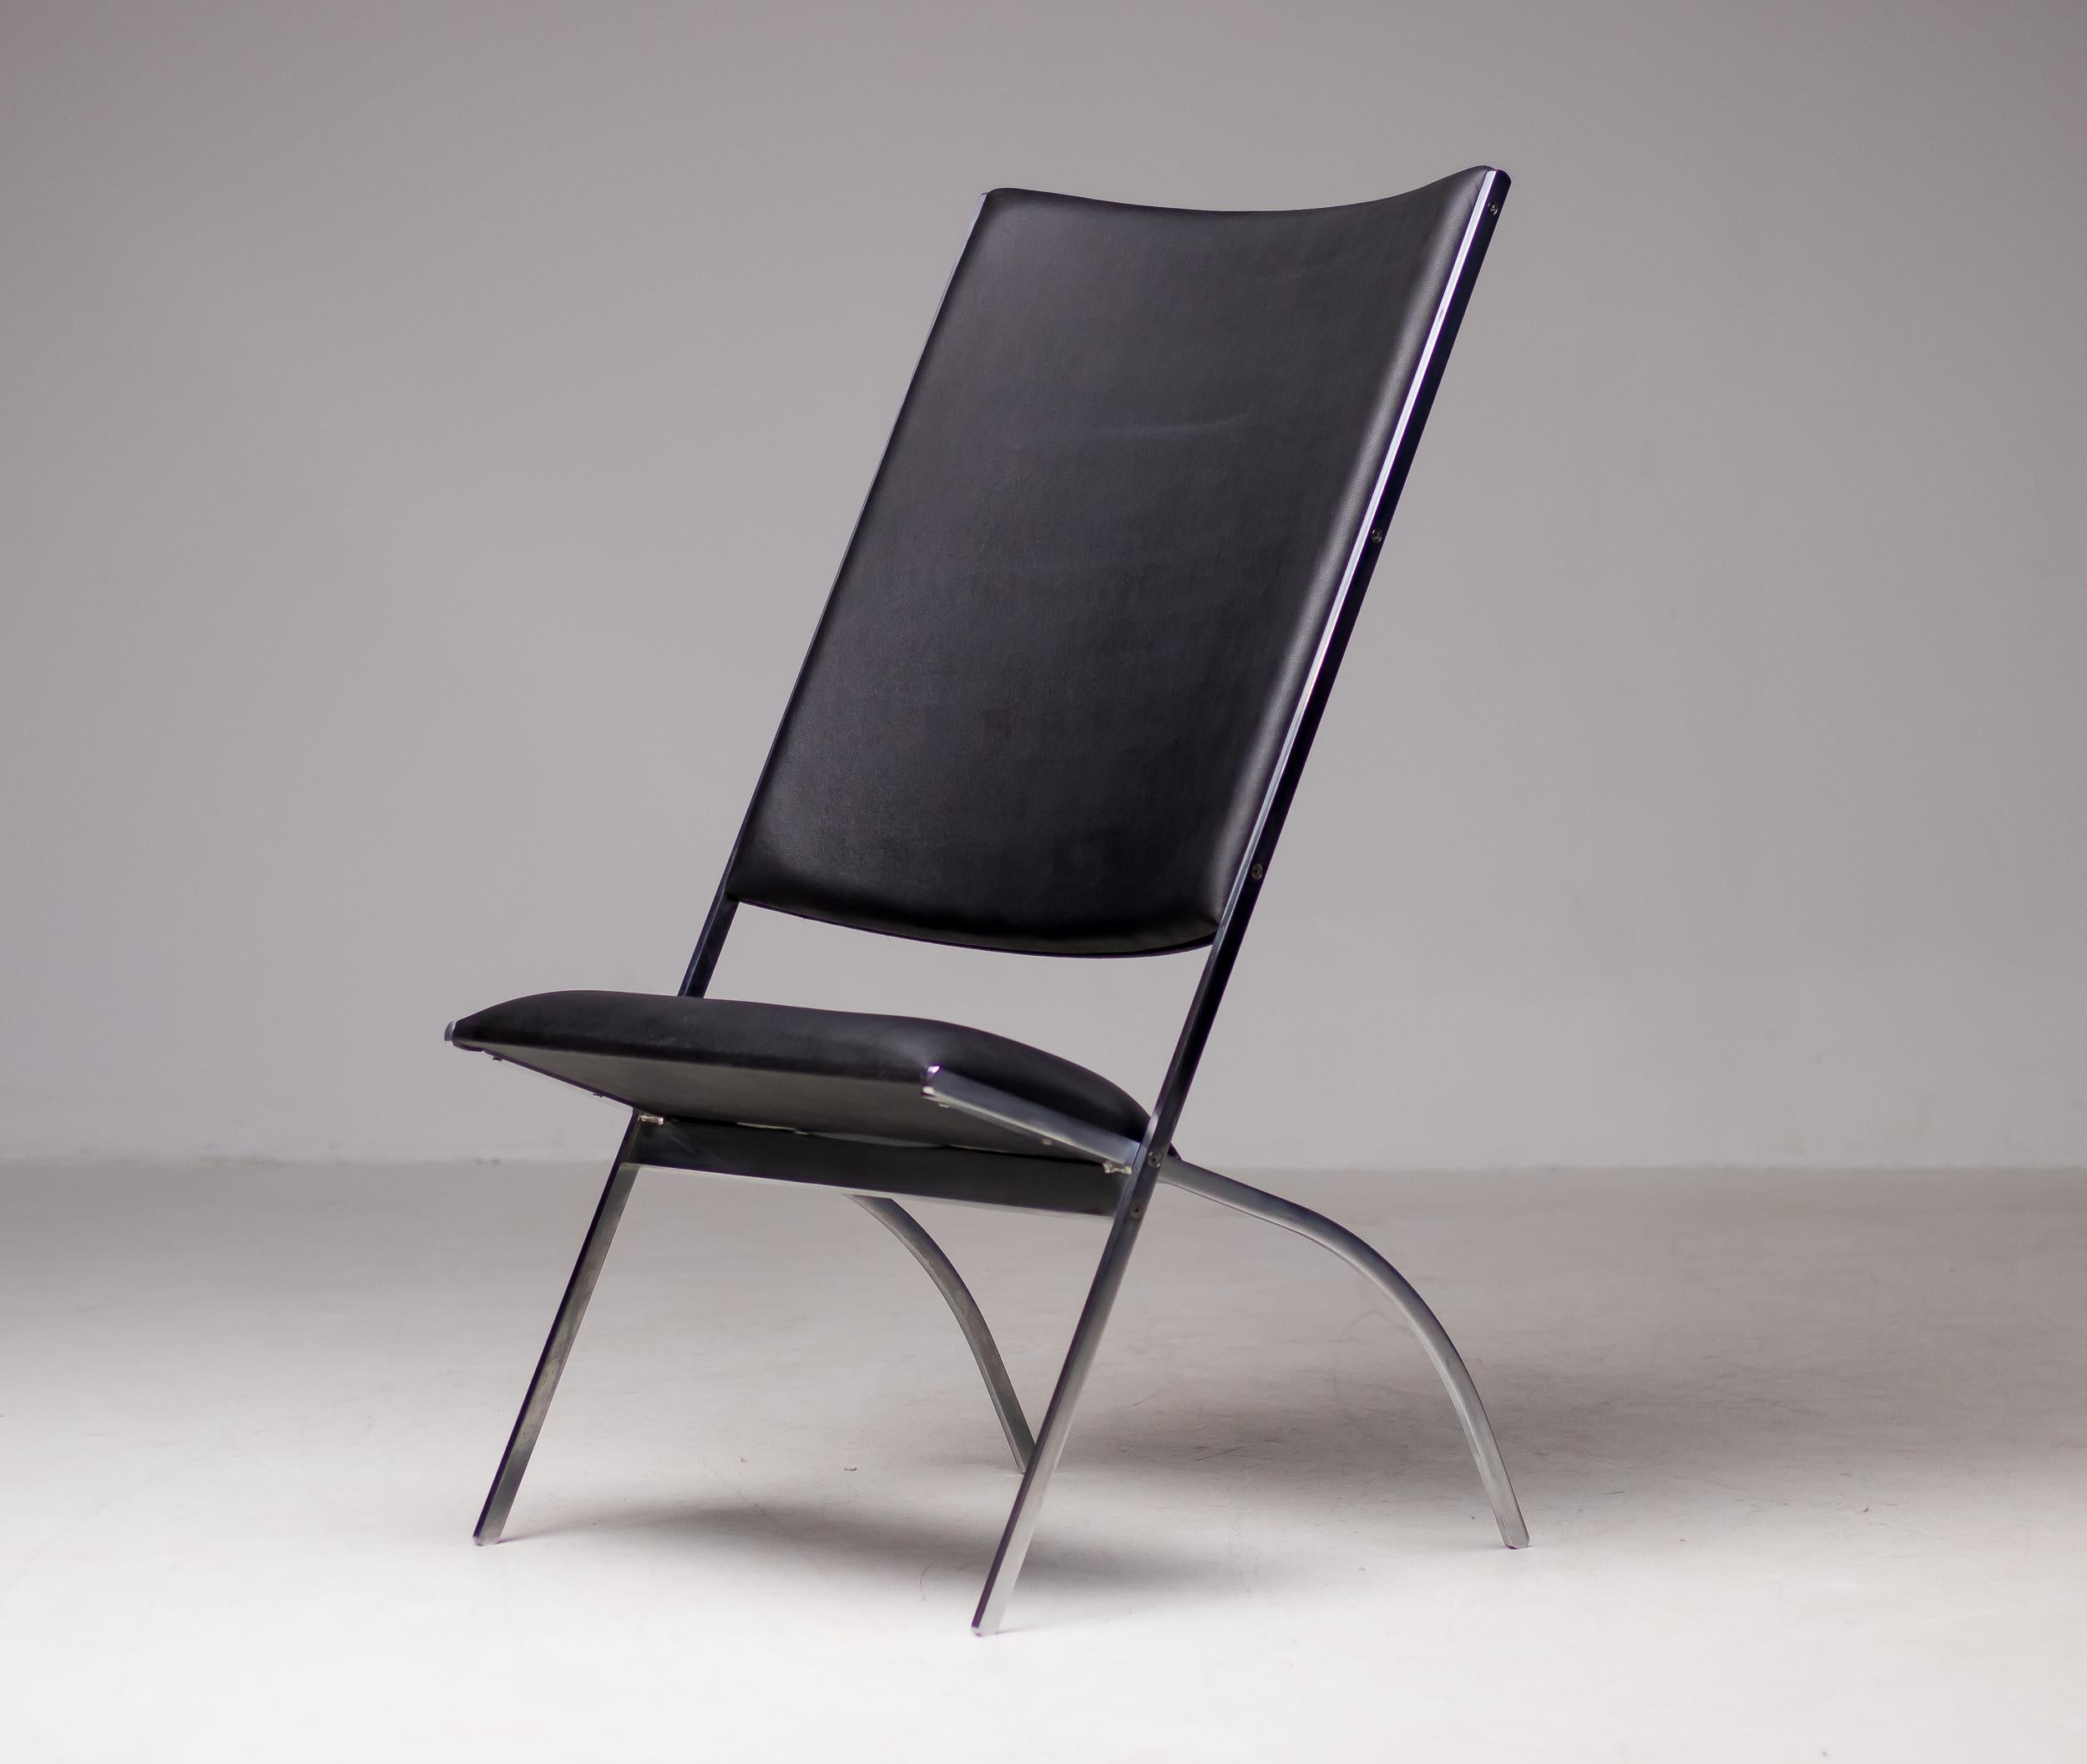 Gabriella folding lounge chair with a steel frame, seat, and back upholstered in black Naugahyde.  
This iconic chair was designed by the Italian designer Gio Ponti and released in a limited edition of 100 pieces by Paolo Pallucco in 1991.  This